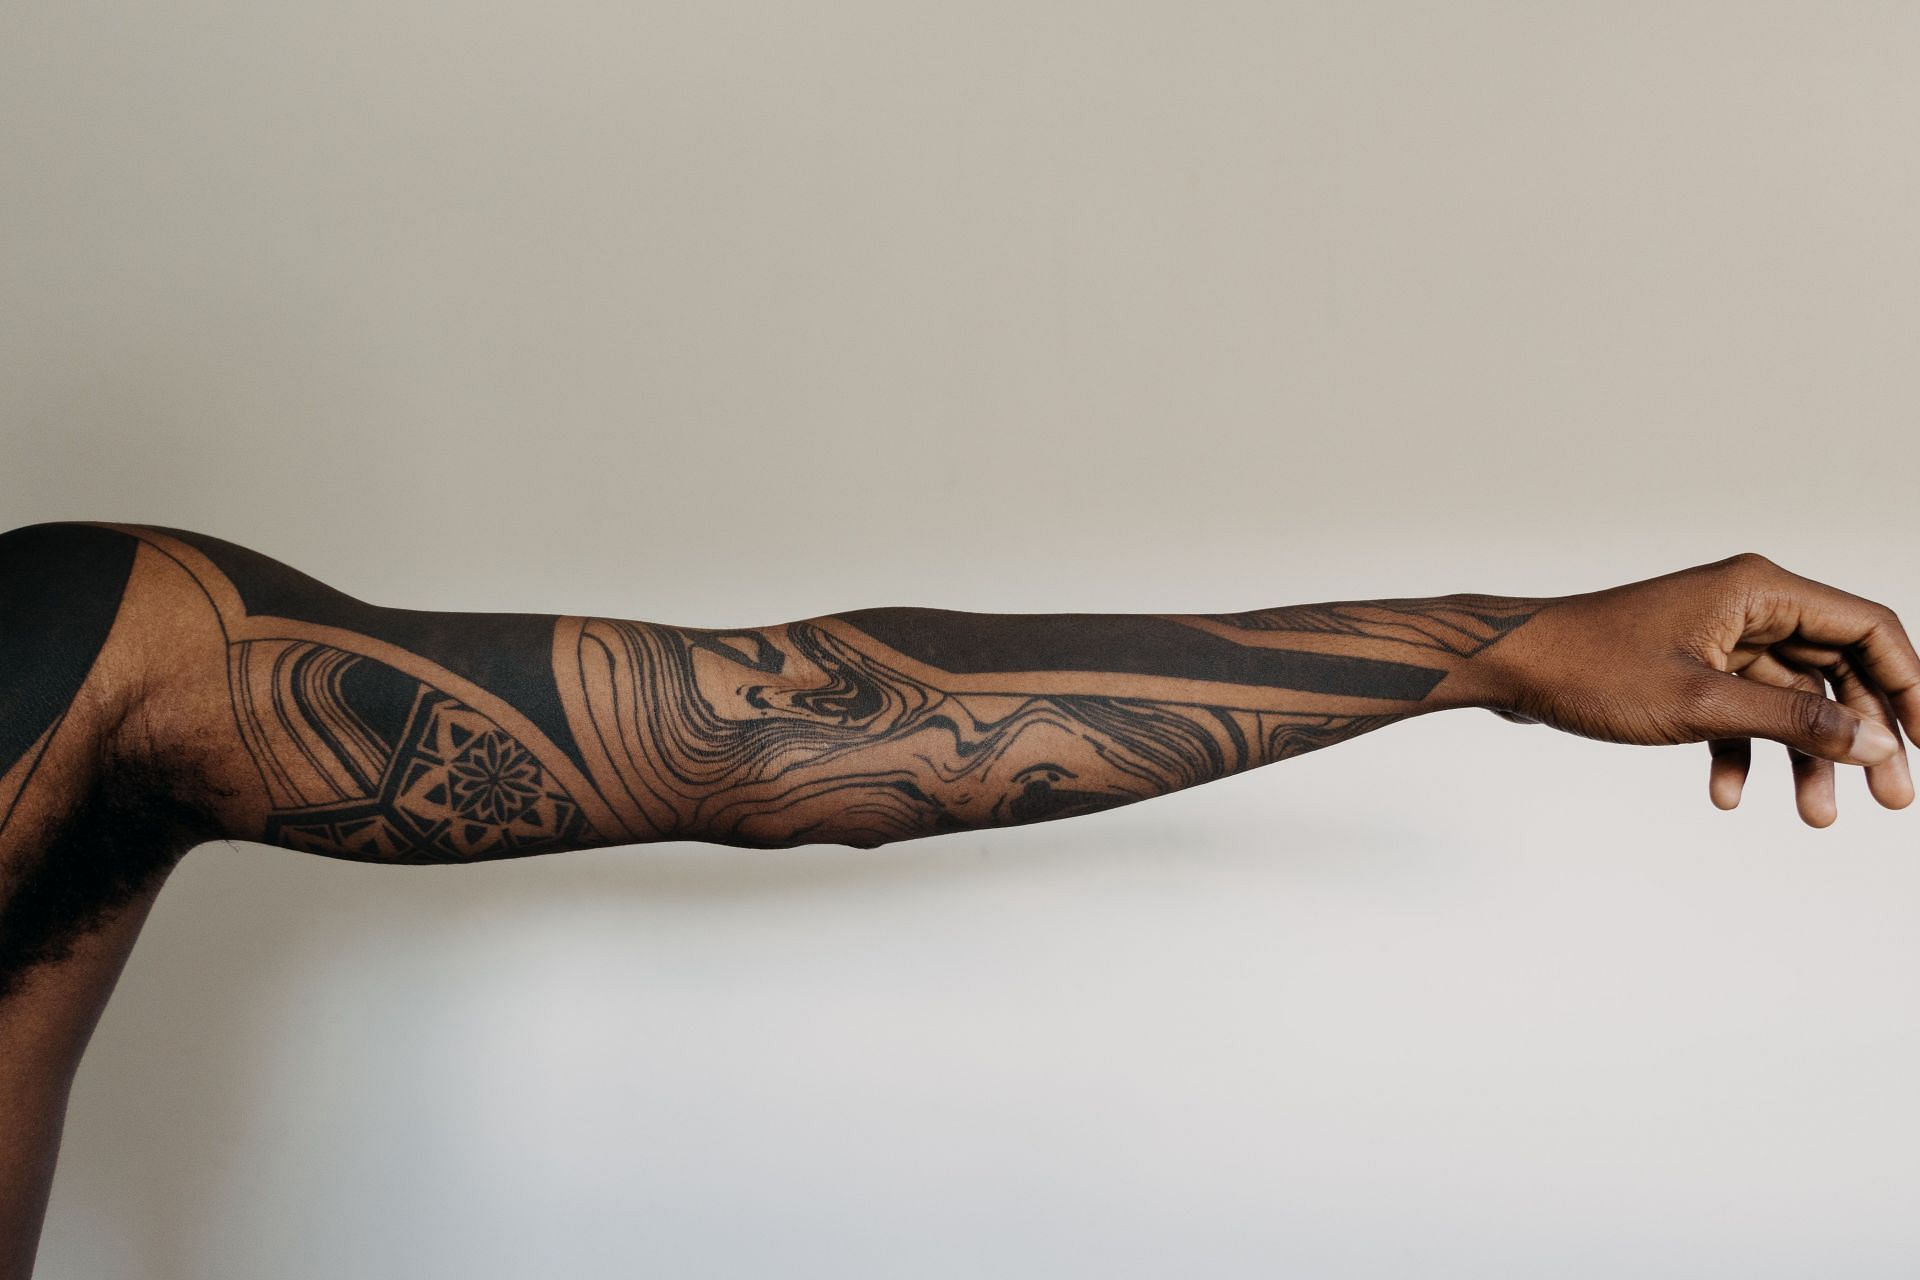 A good tattoo should be without any inflammation or scabs. (Image via unsplash/Seyi Ariyo)